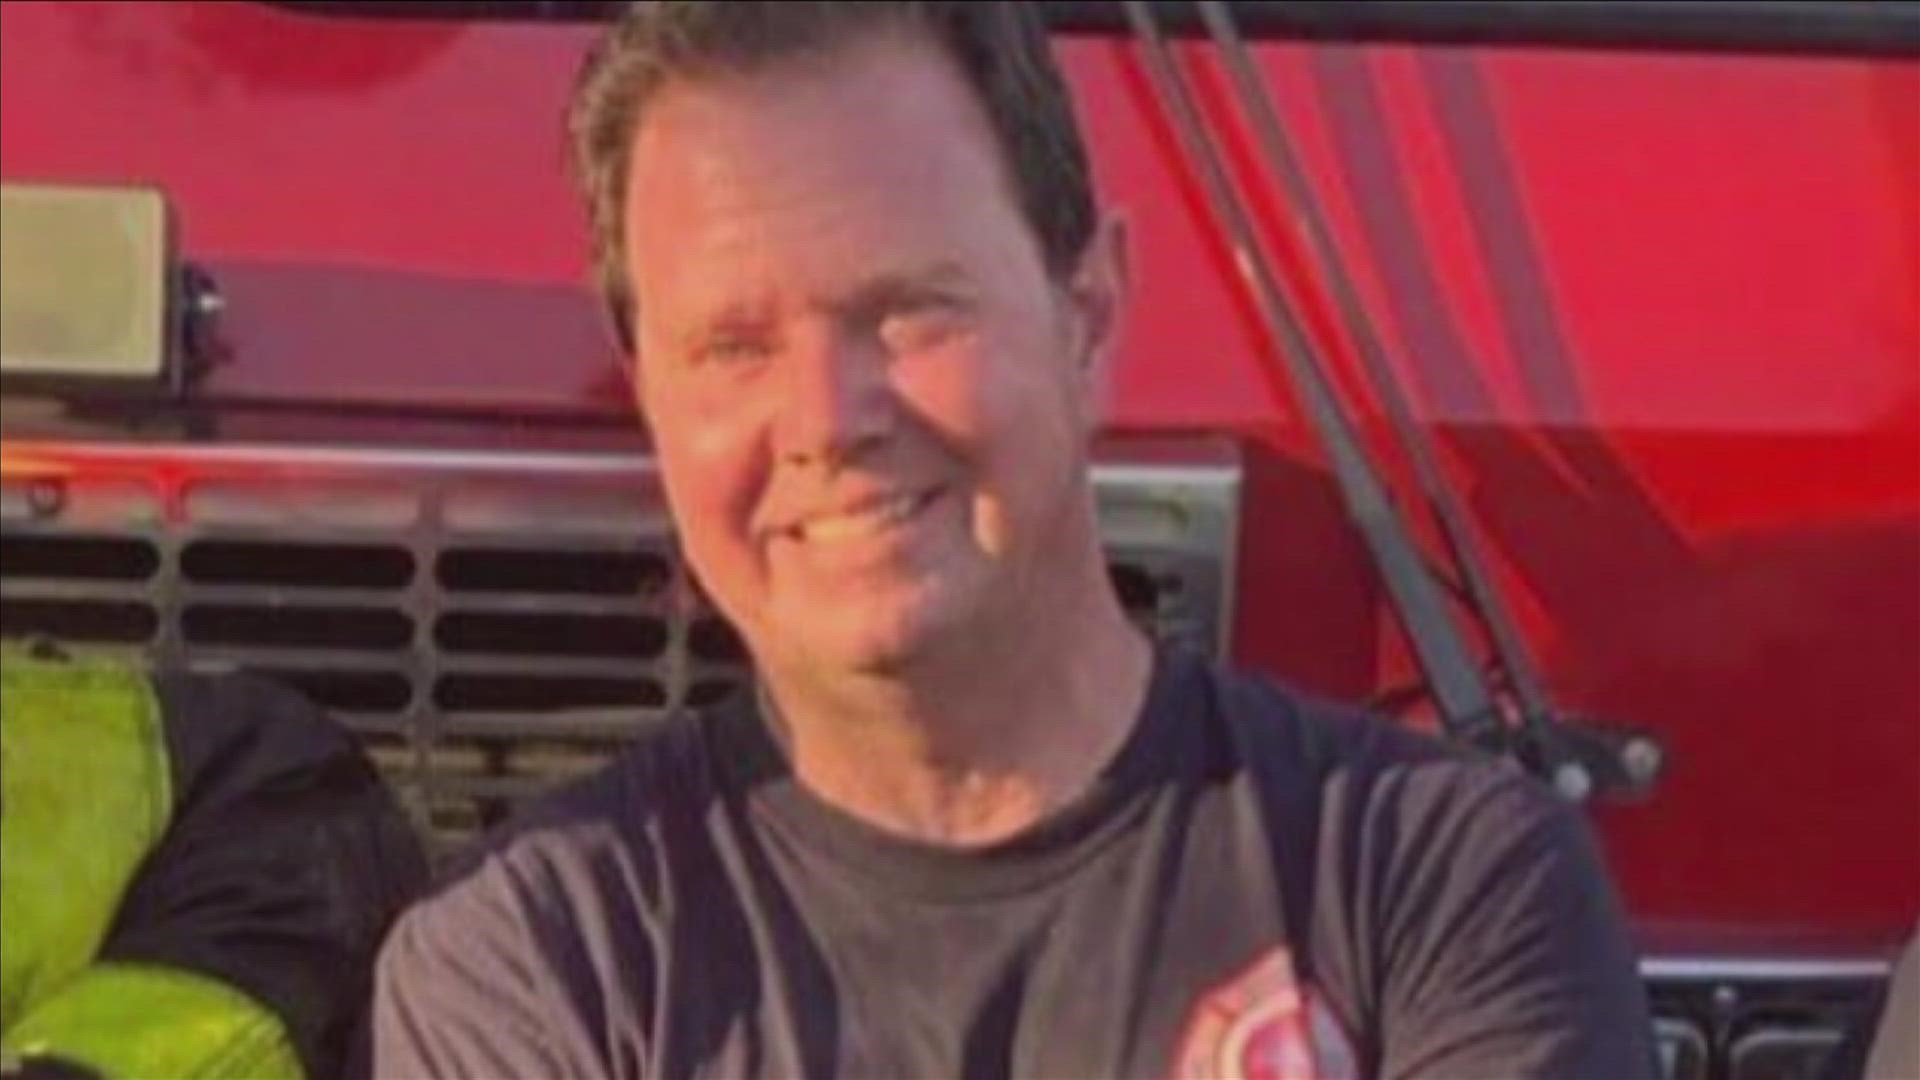 The 32-year Memphis Fire Department veteran was killed in the line of duty Wednesday night while on the way to a house fire call.